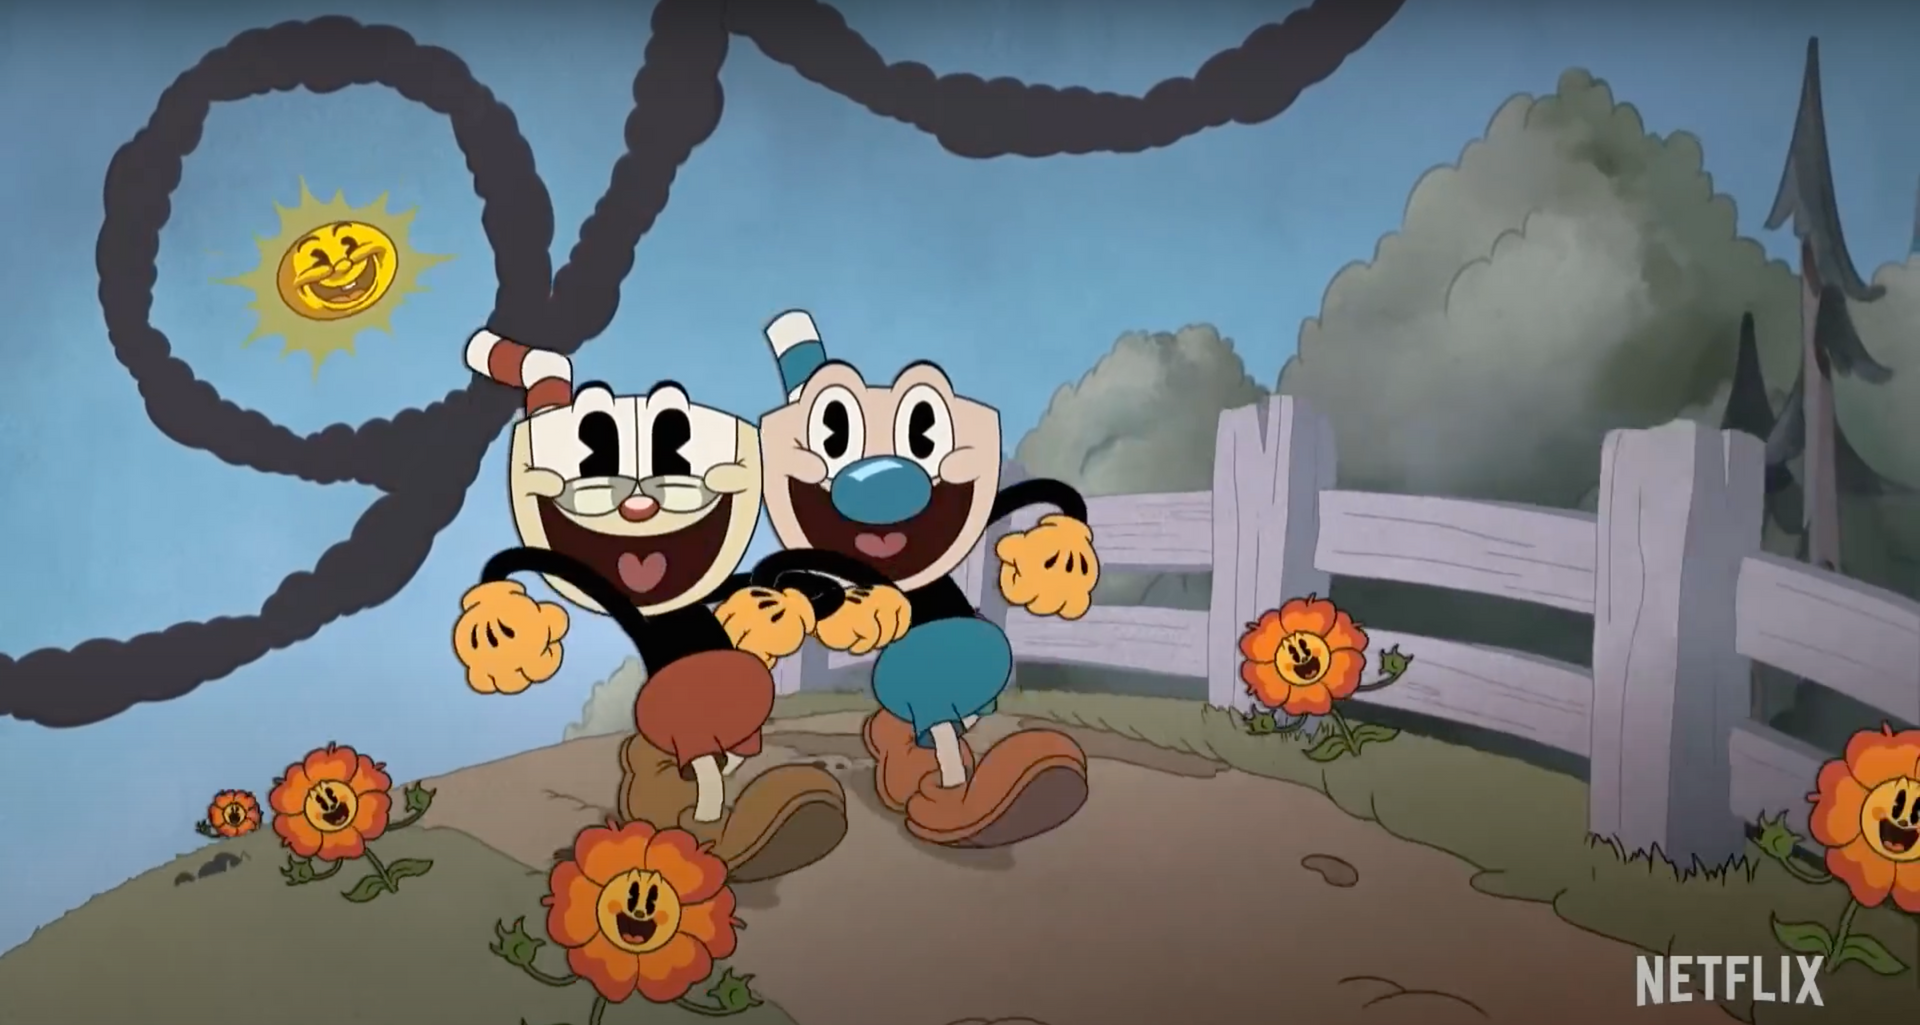 The Cuphead Show on X: Extra!! Extra!! The fine folks at @iam8bit present…  The Cuphead Show Collection! Celebrate your favorite porcelain pals with  lovingly crafted wares, from stylish socks to a limited-edition